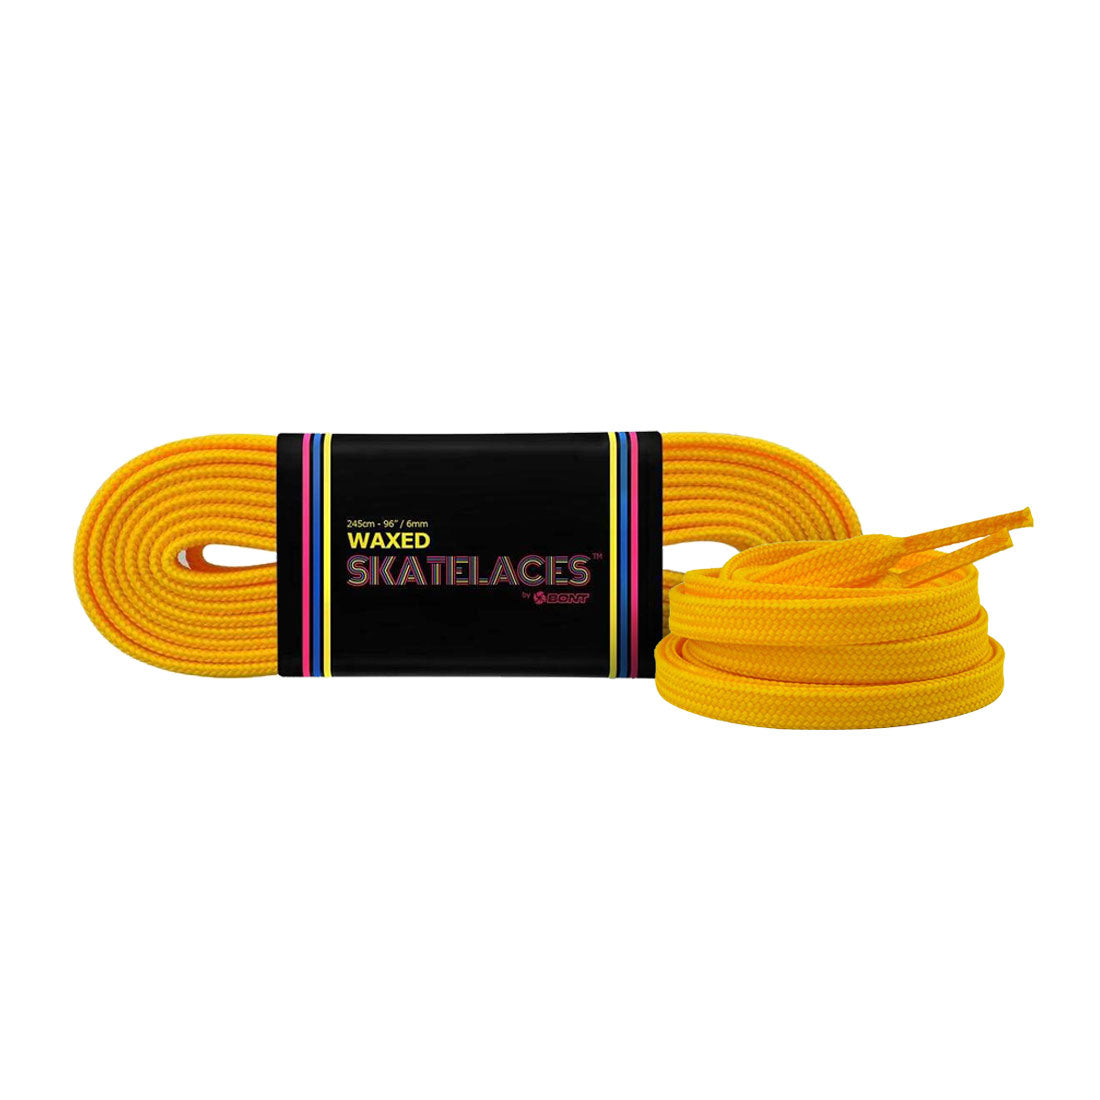 Bont Waxed 8mm Laces - 150cm/59in Bumblebee Yellow Laces